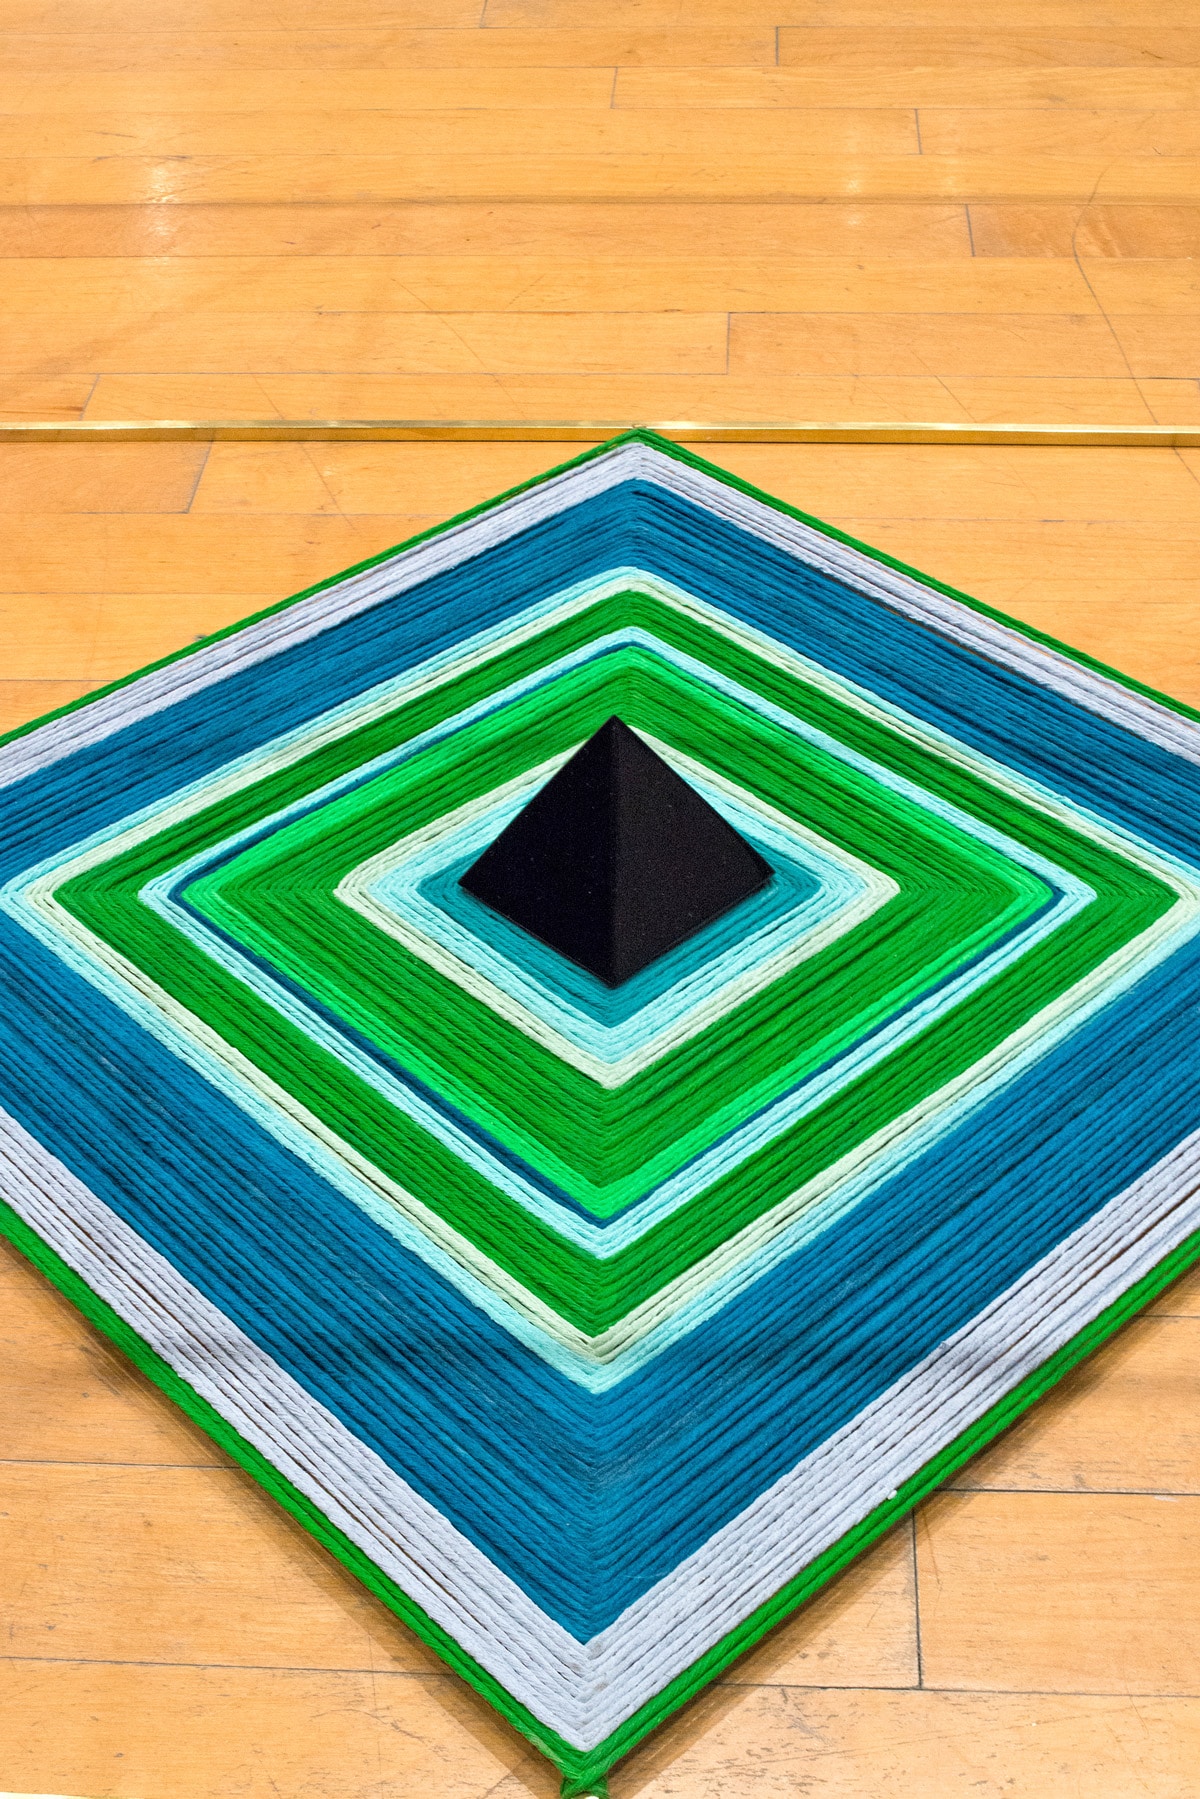 Geometric installation made of green, blue and white yarn